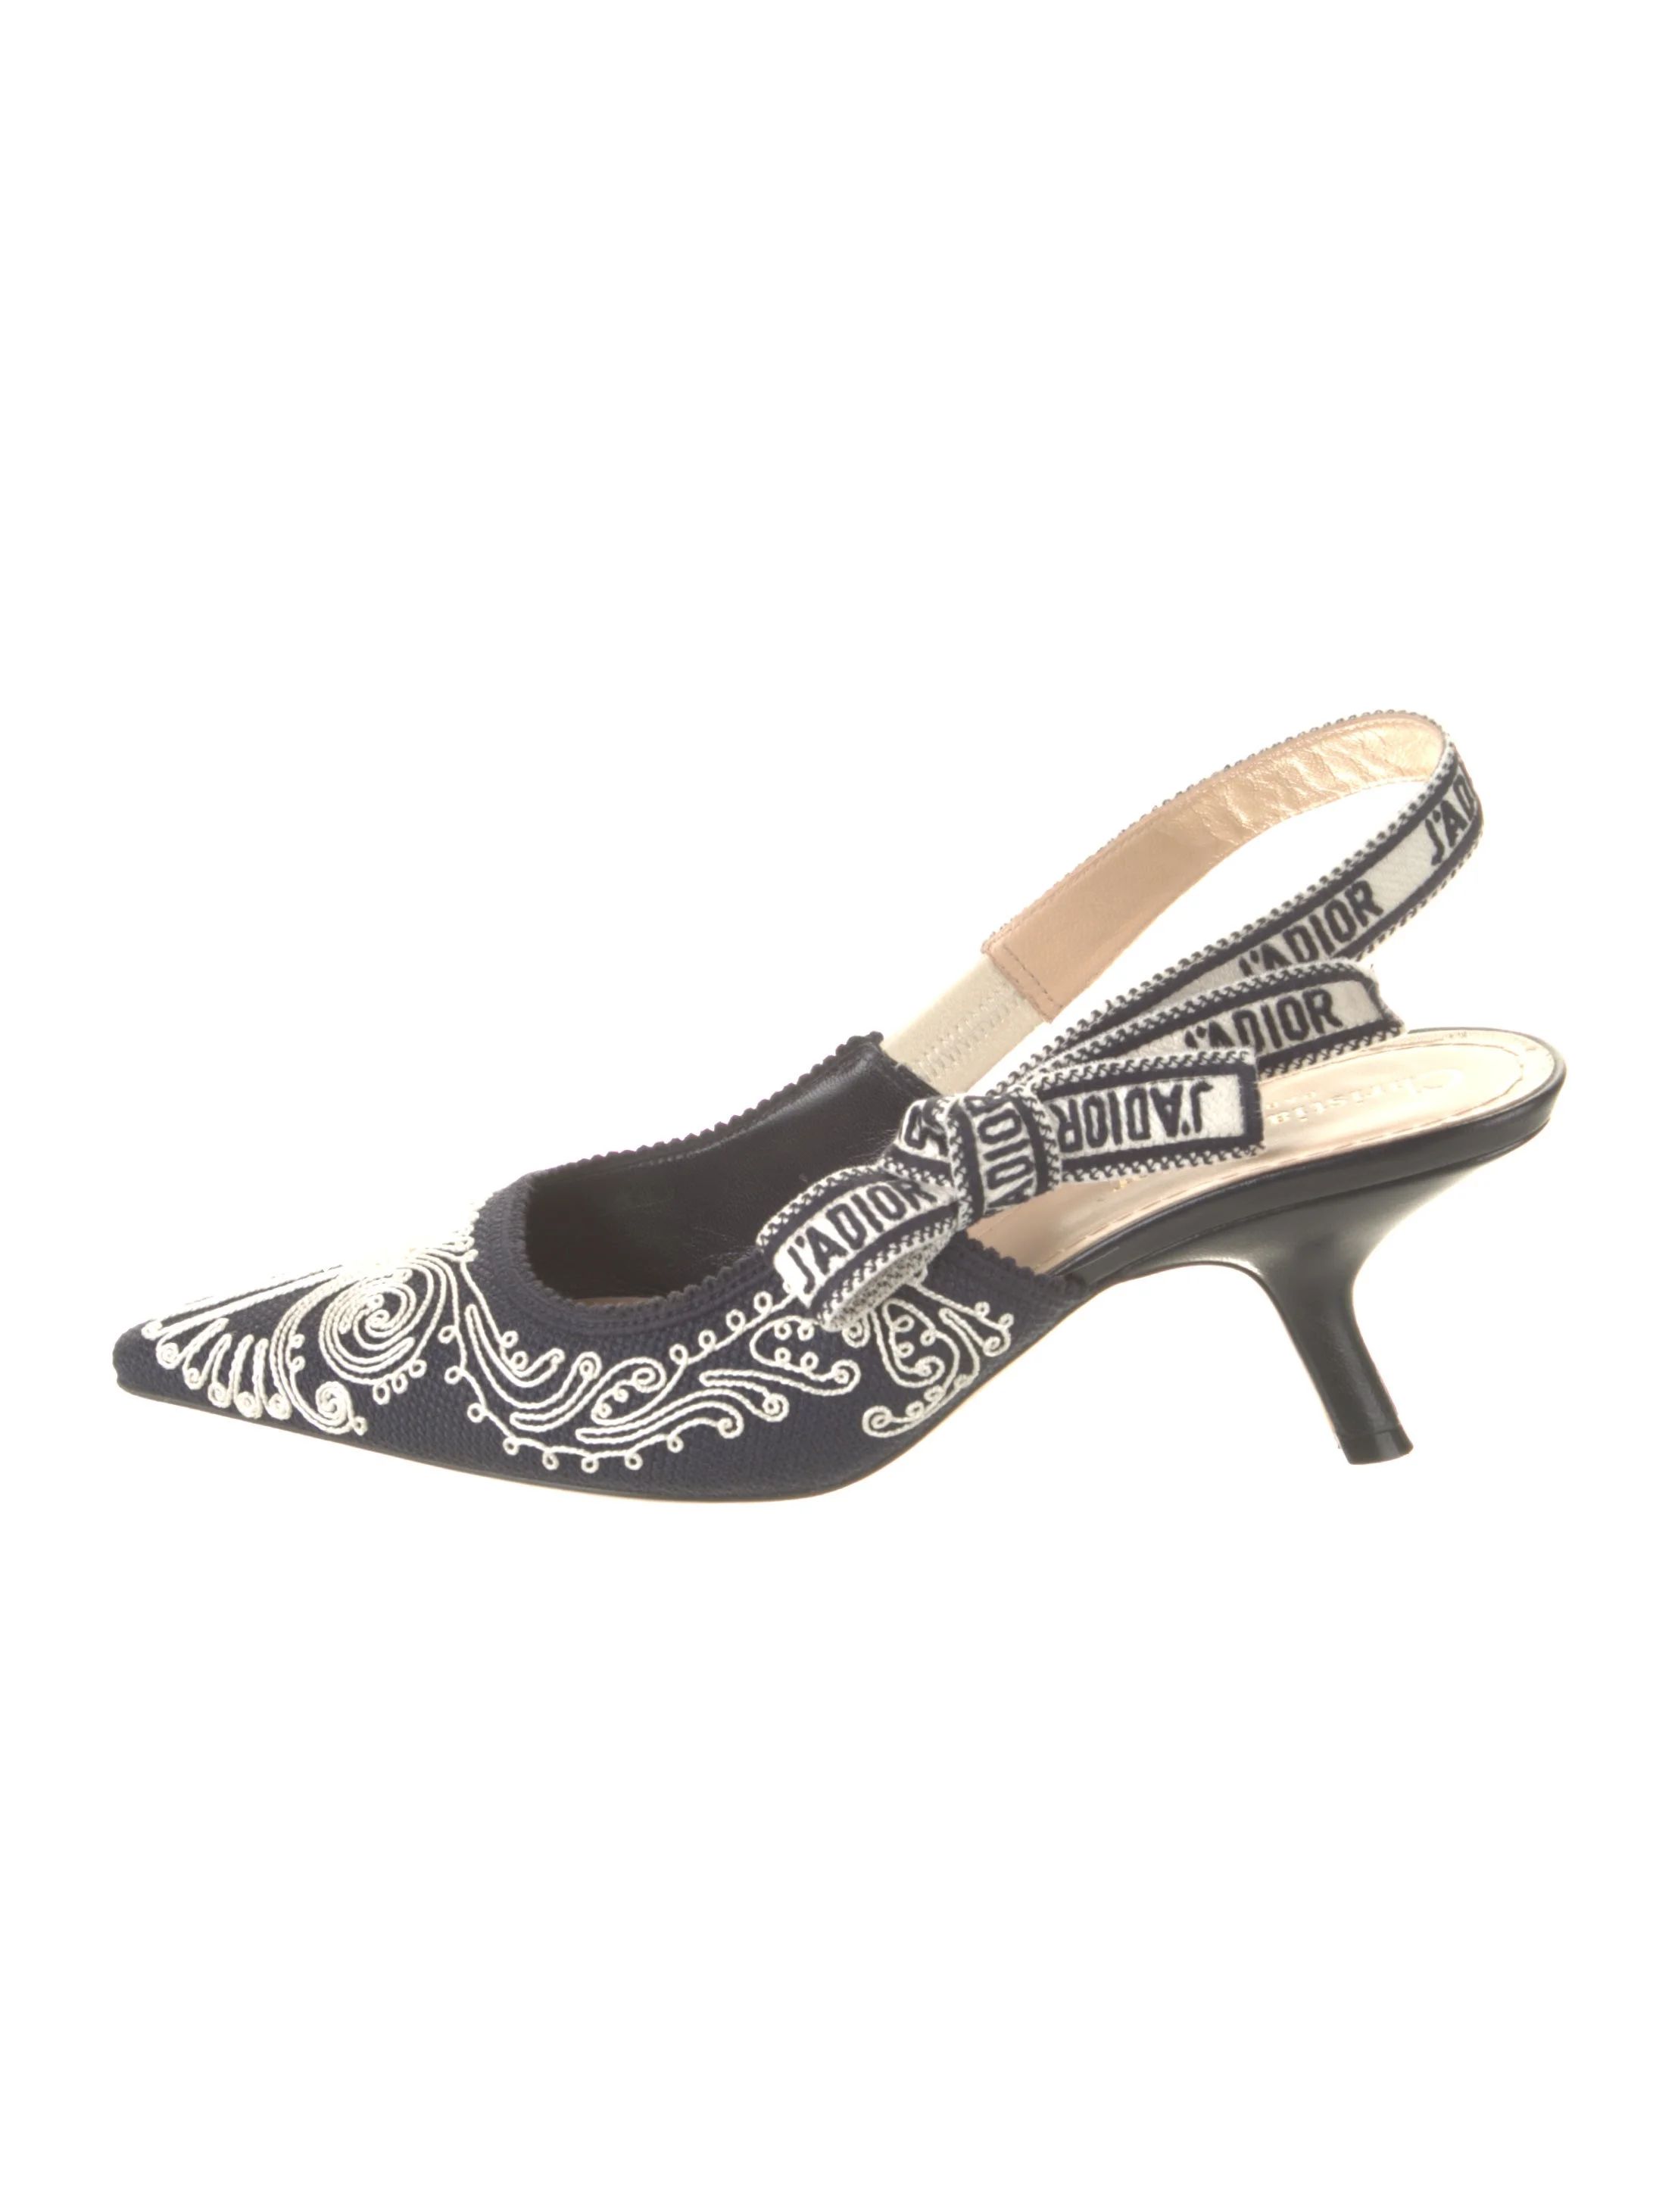 Canvas Printed Slingback Pumps | The RealReal